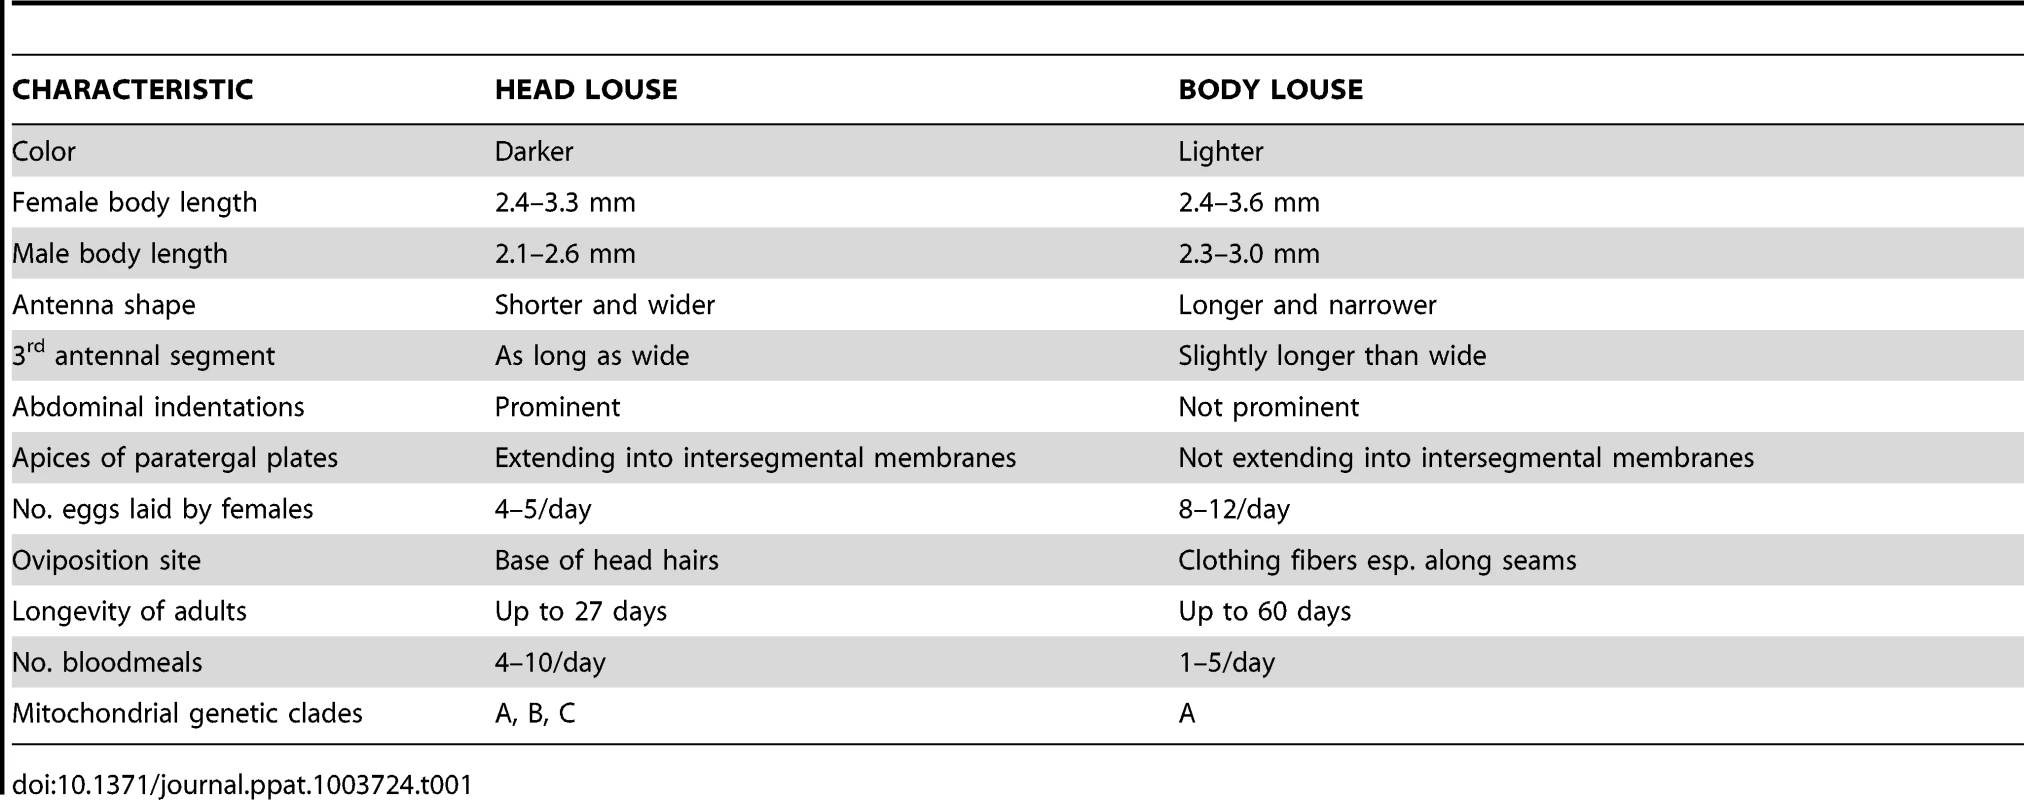 Selected morphological and biological differences between human head and body lice.